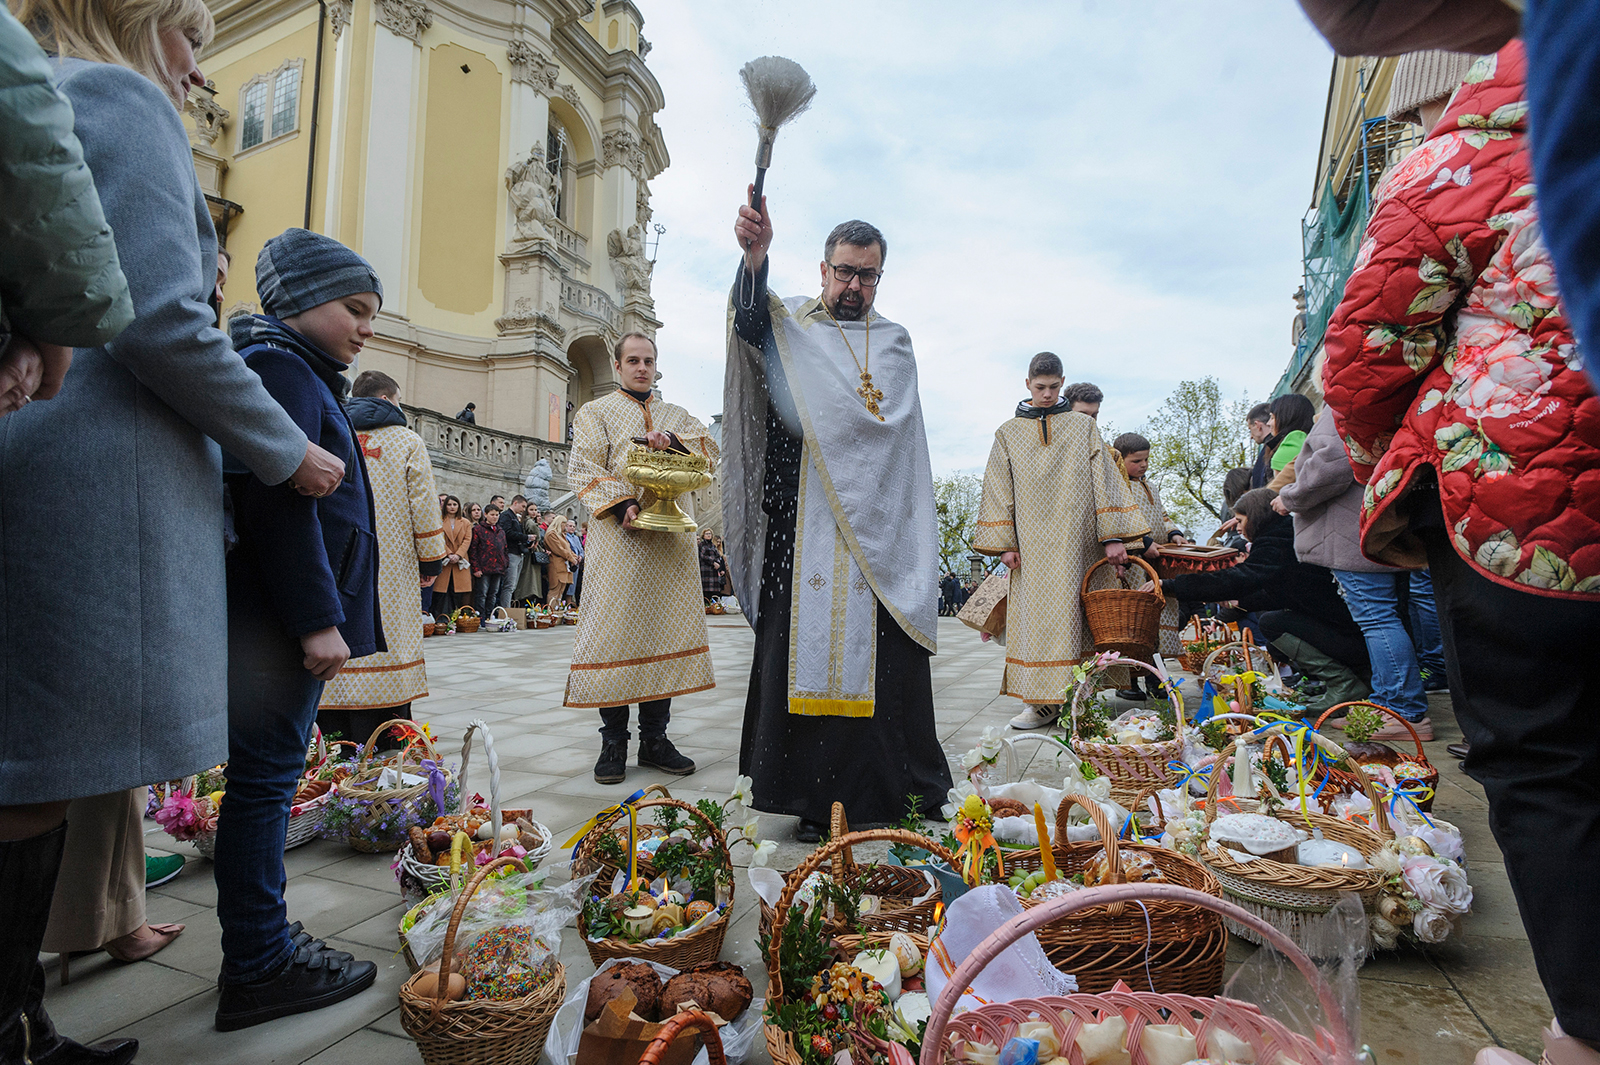 A Ukrainian priest blesses traditional cakes and painted eggs prepared for an Easter celebration in the in Lviv, Ukraine, Saturday, April 23. 